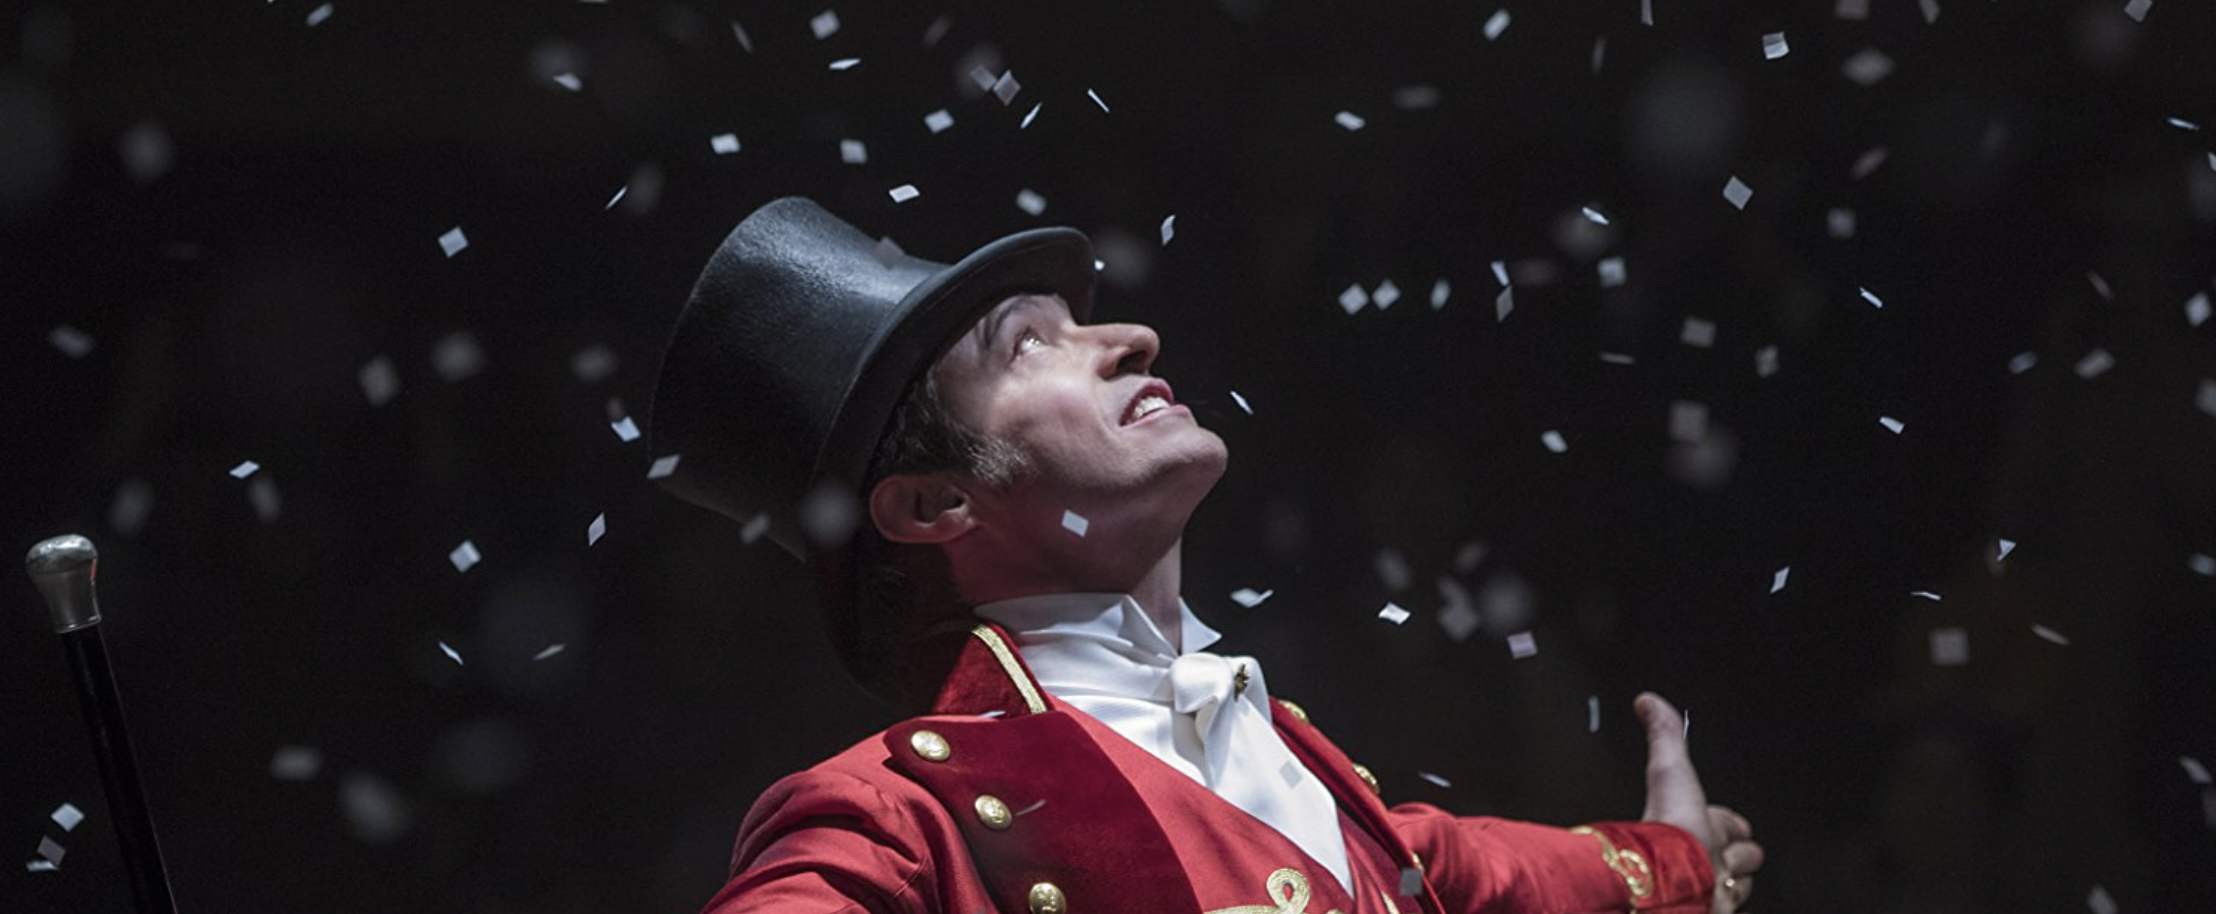 REVIEW: The Greatest Showman